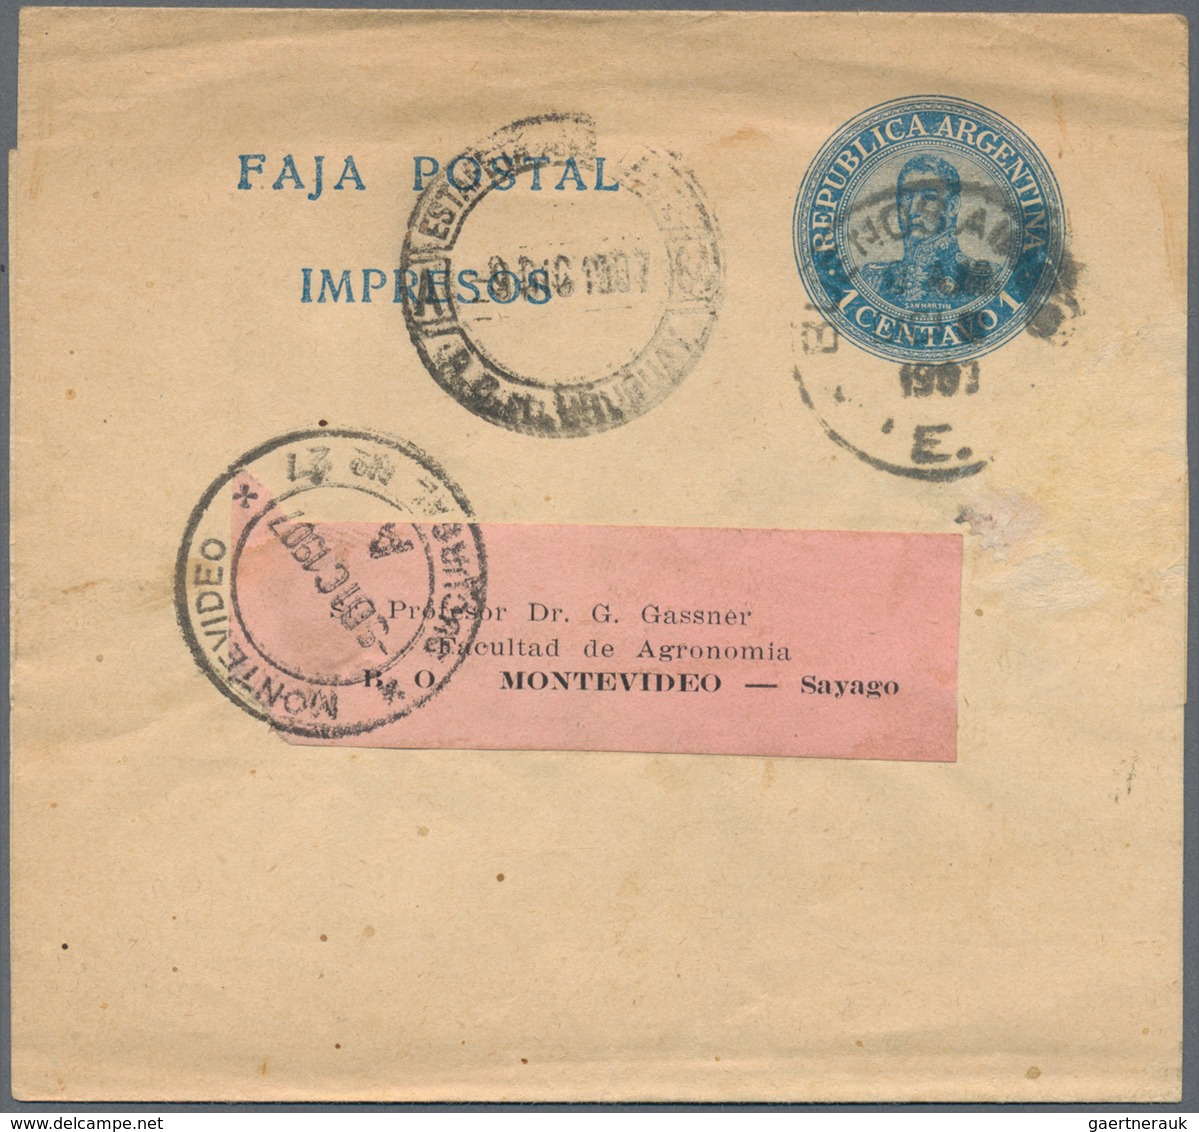 Argentinien - Ganzsachen: 1885/1921 (ca.), stationery mint/used (10/31) inc. 1949 p.o. box license 1